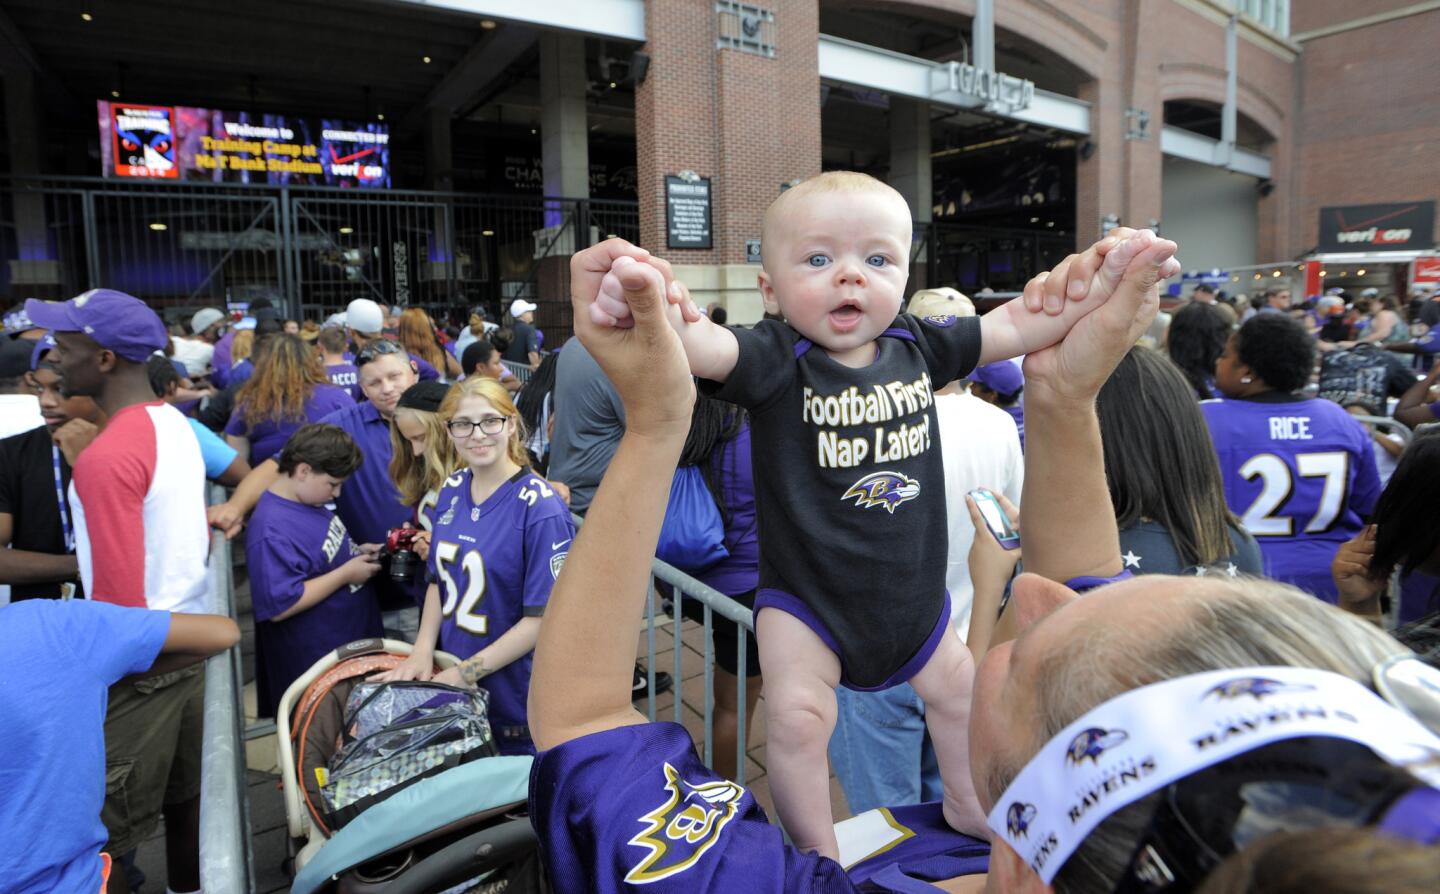 Littlest fans at M&T in 2014